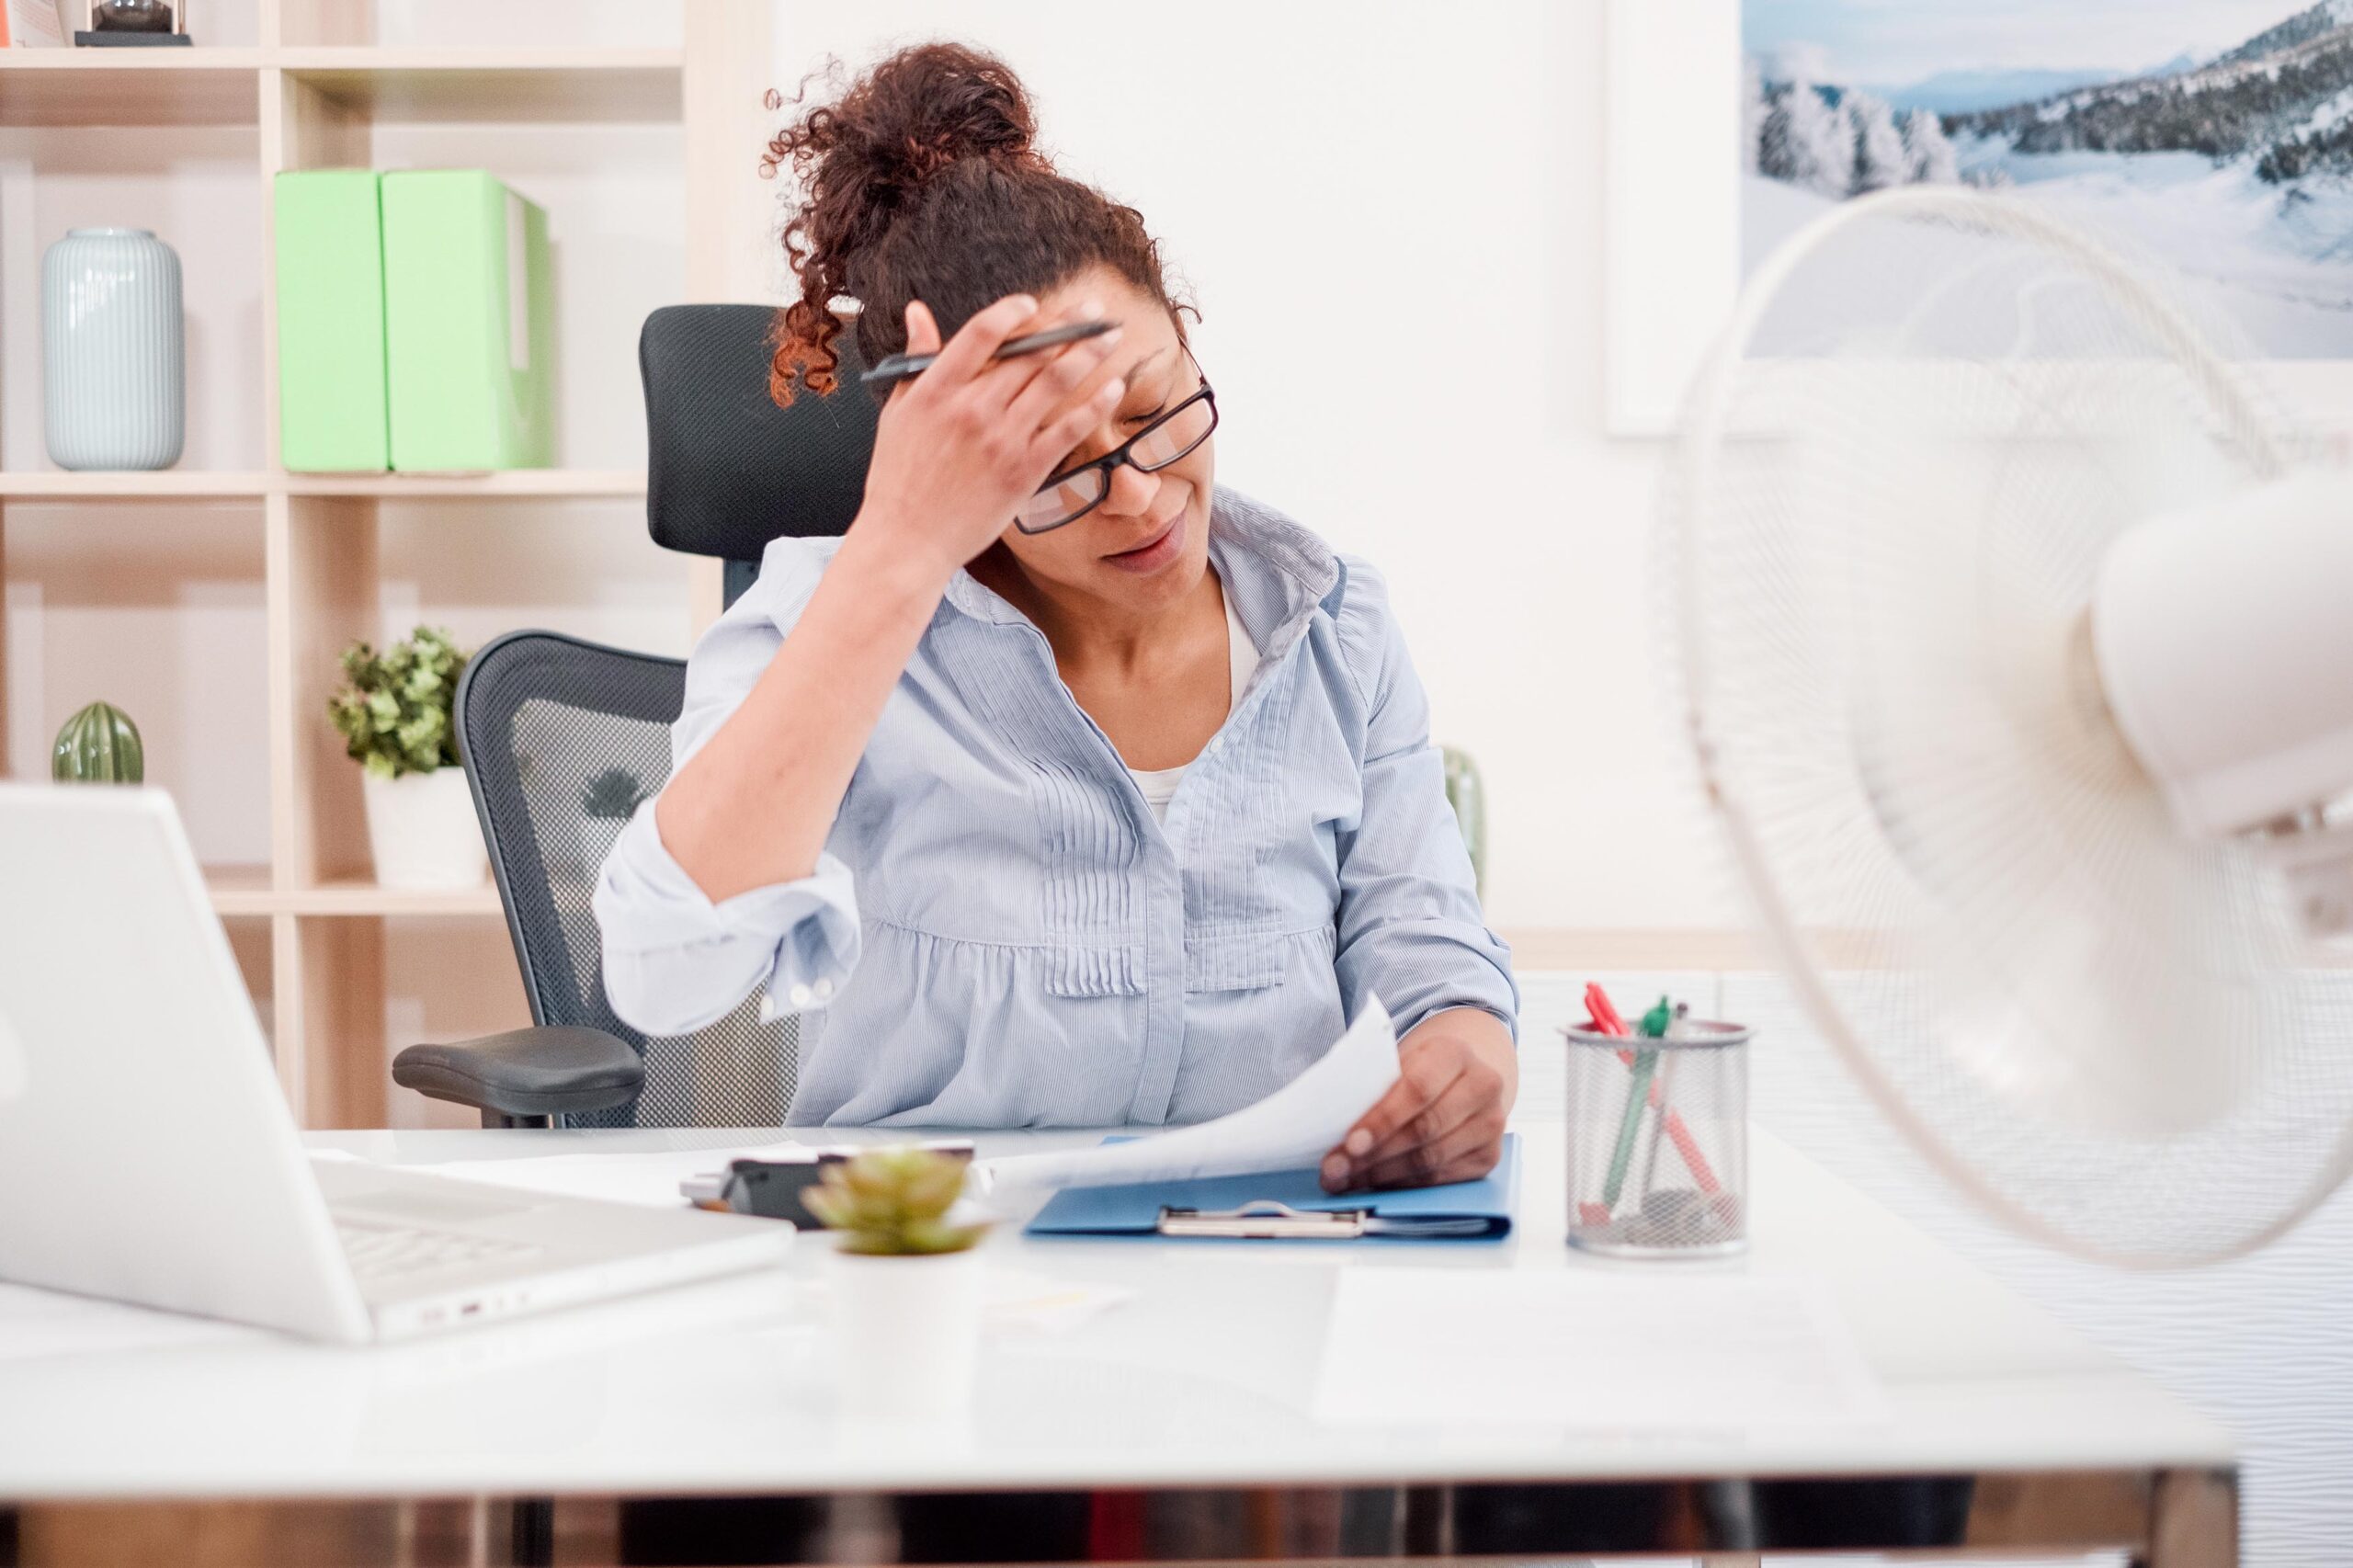 Does heat affect productivity in the office?